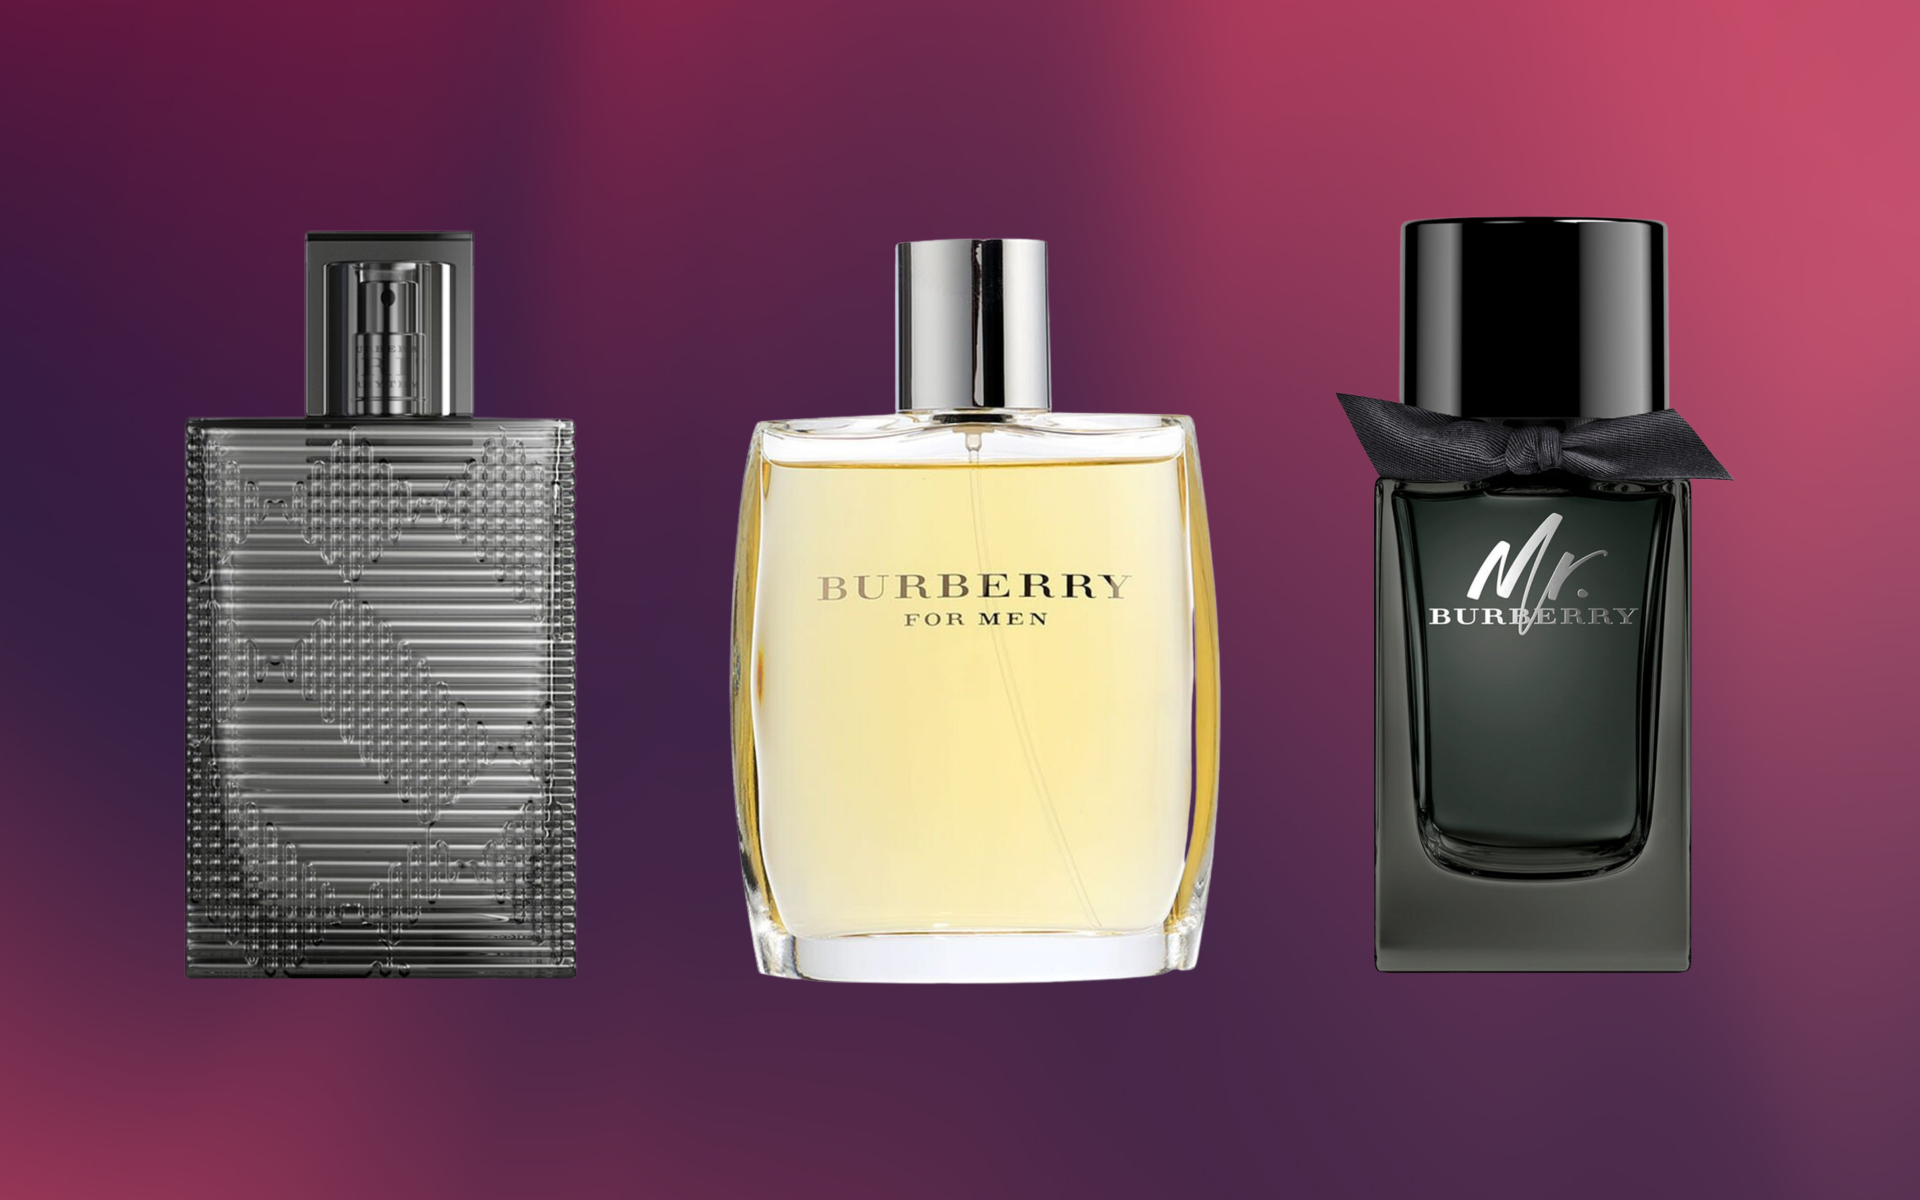 Top 5 burberry for men cologne review in 2023 - Chuyên Trang Chia Sẻ ...